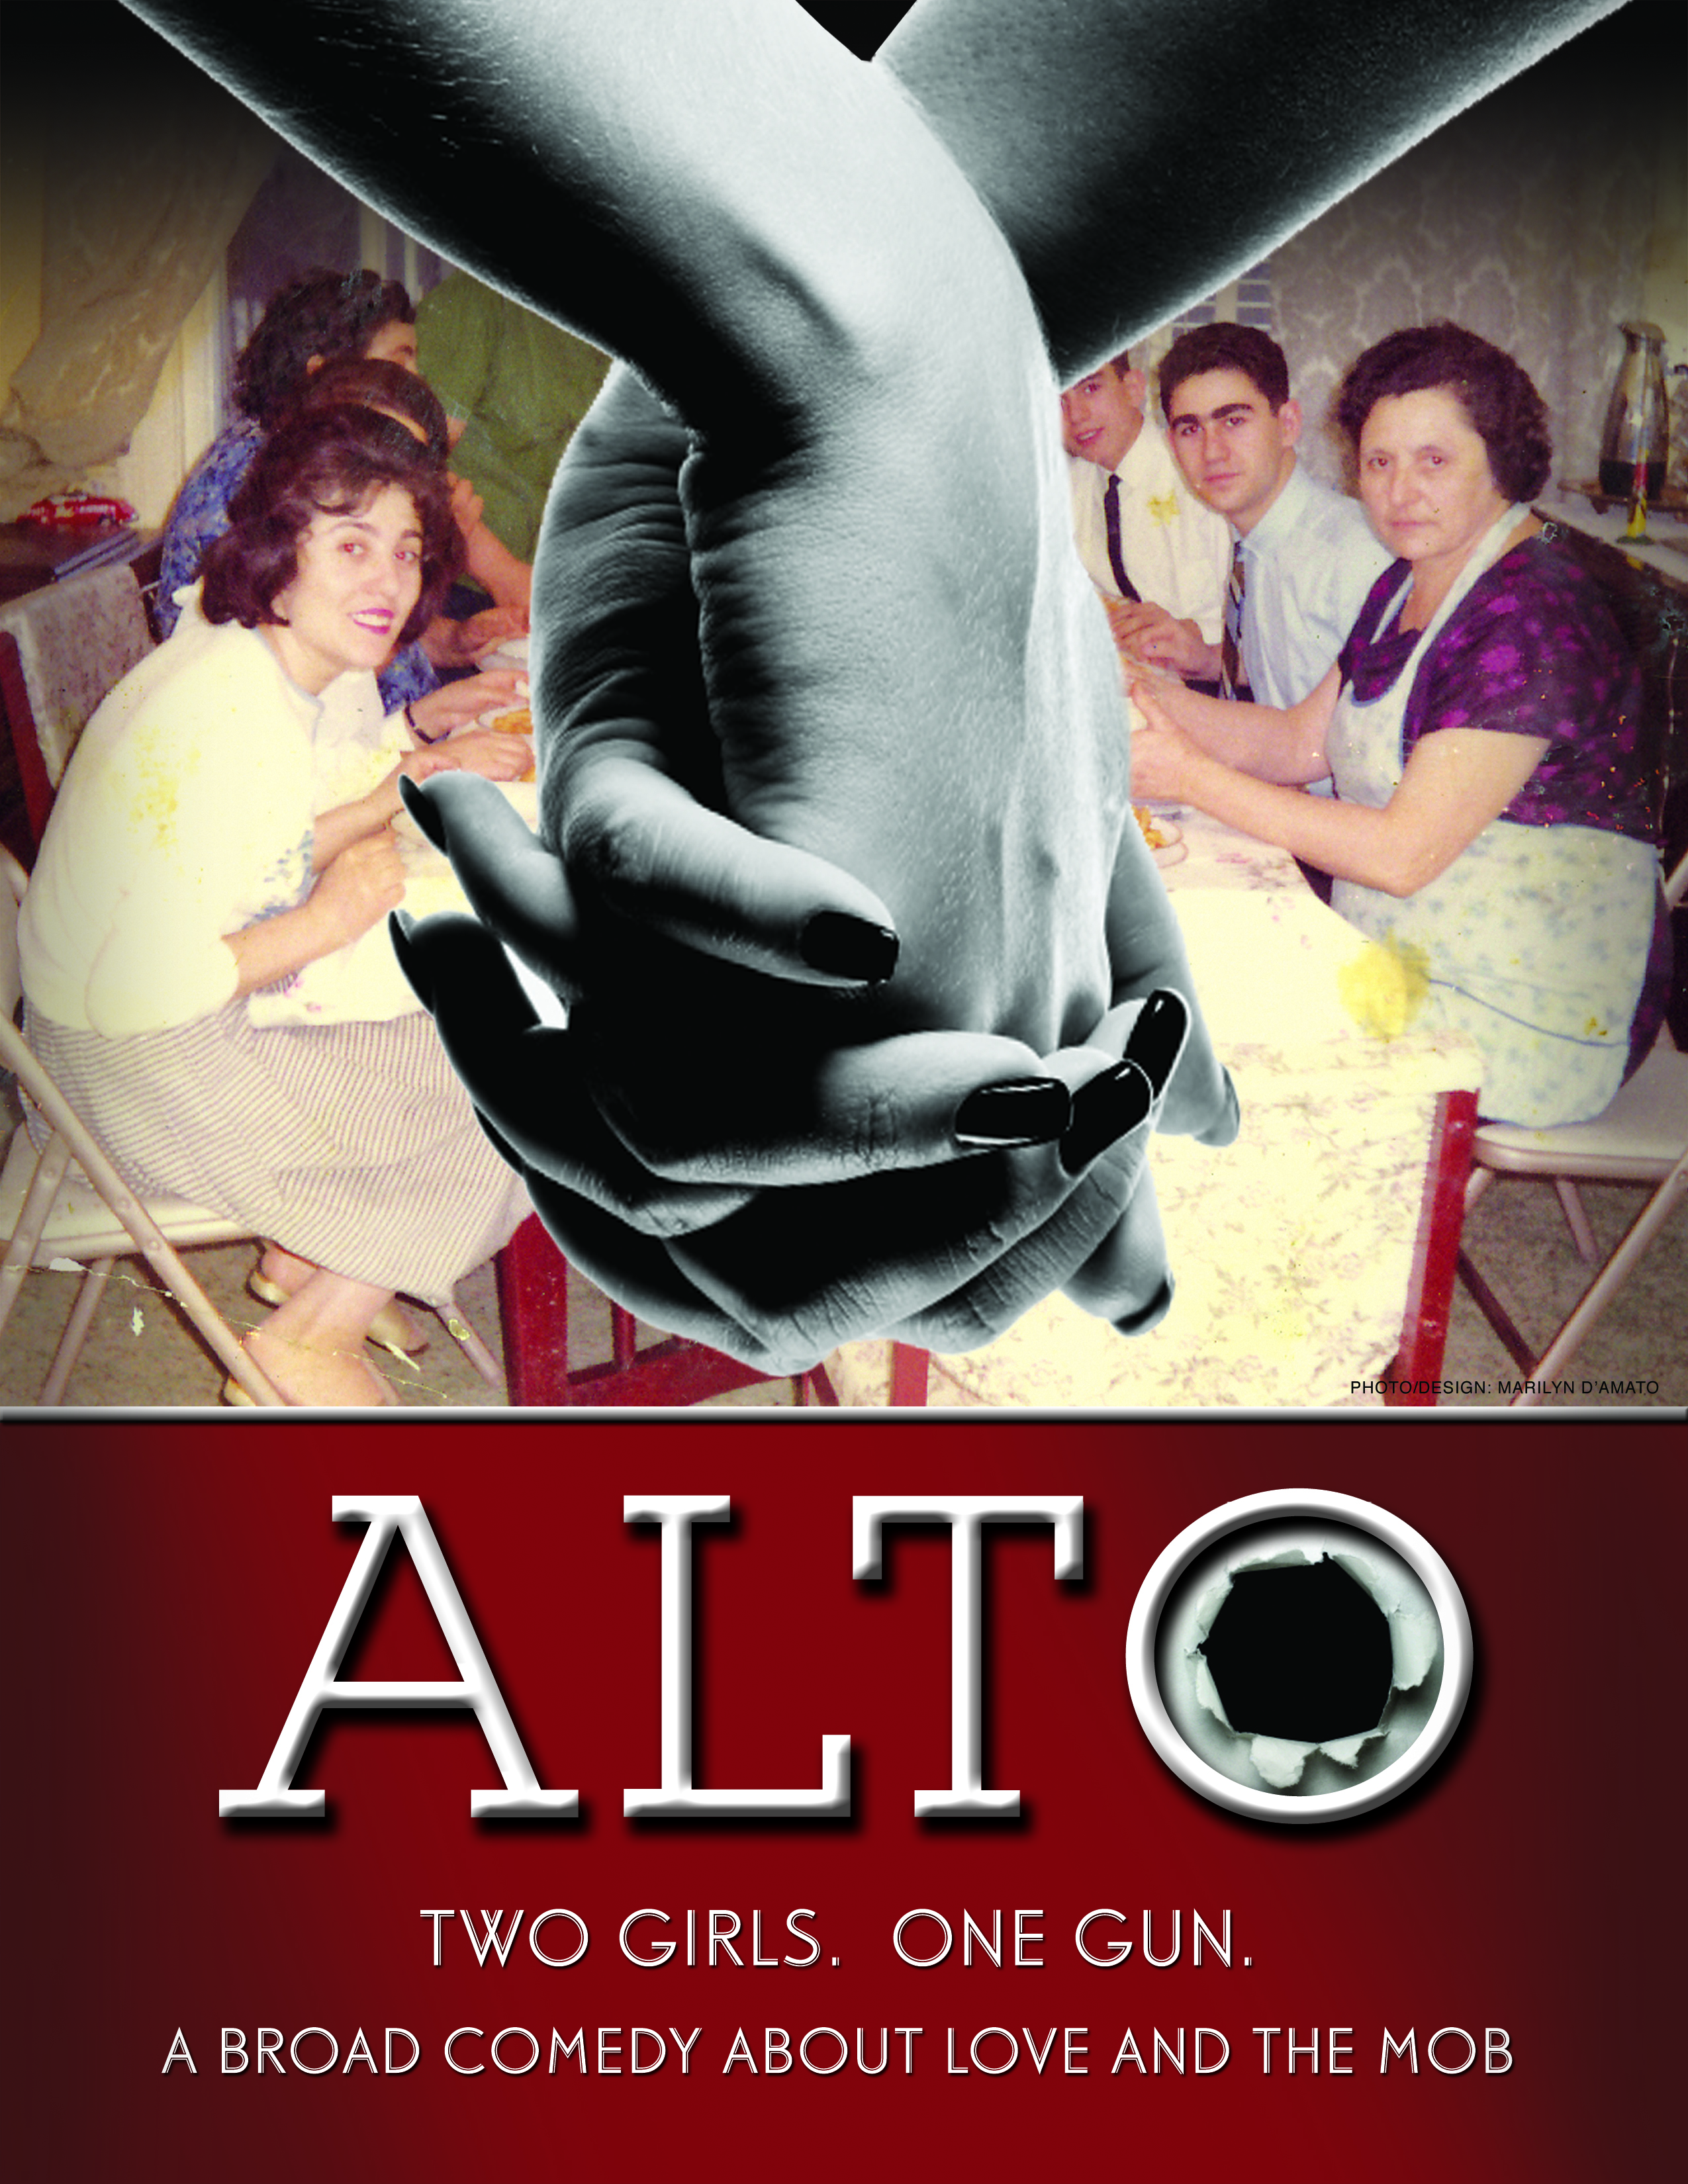 ALTO Feature Film Poster. Written by Mikki del Monico and Produced by Shake The Tree Productions. Currently in development.